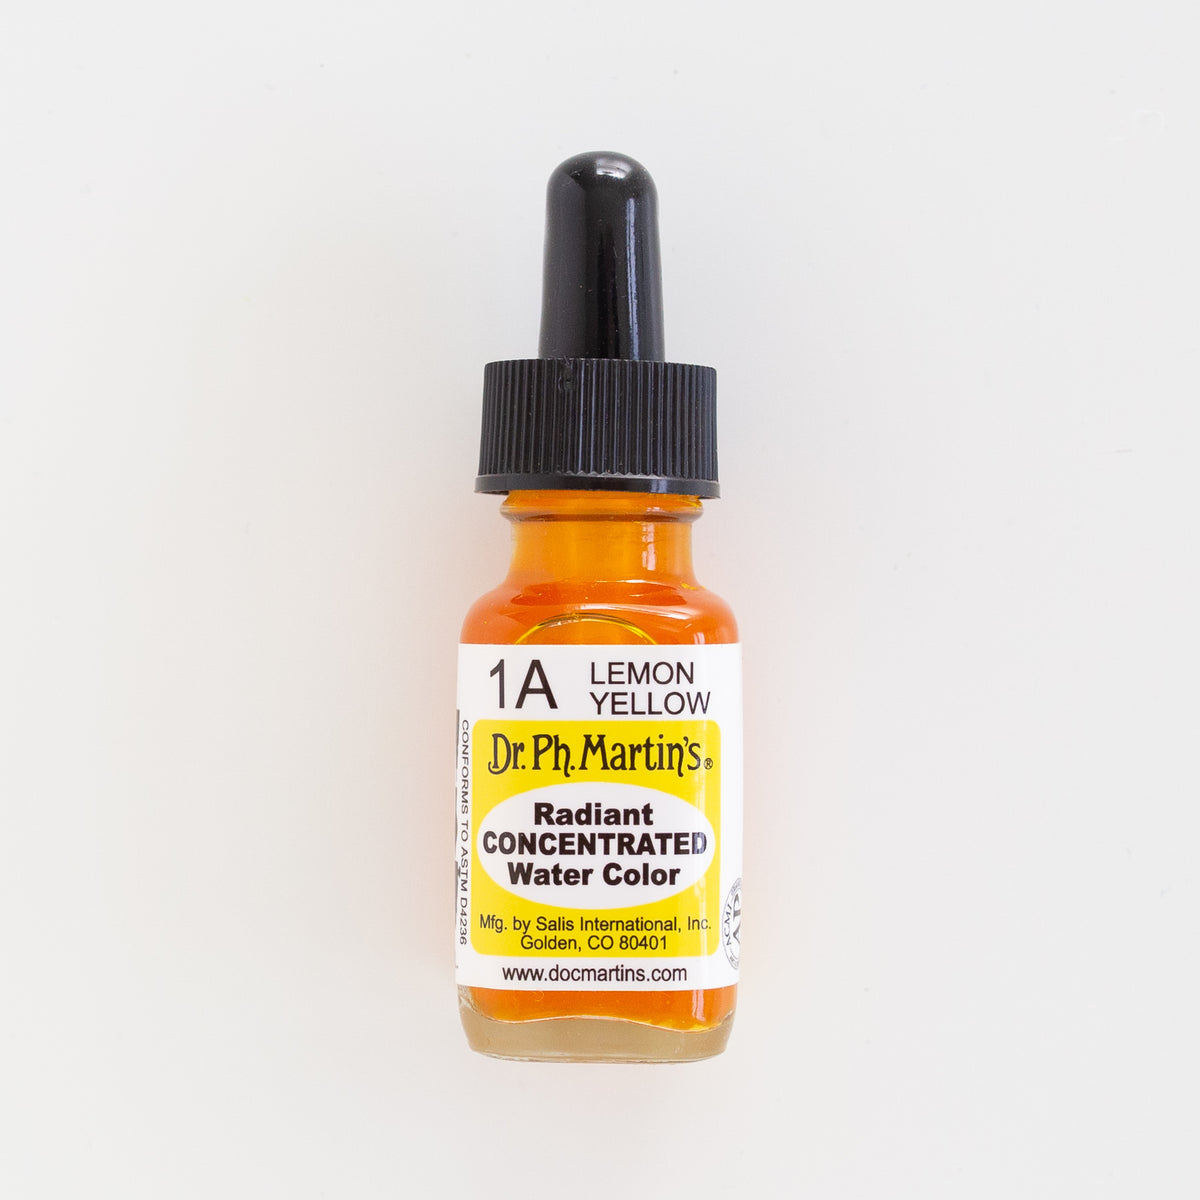 Dr. Ph. Martin’s Radiant Concentrated 1A Lemon Yellow